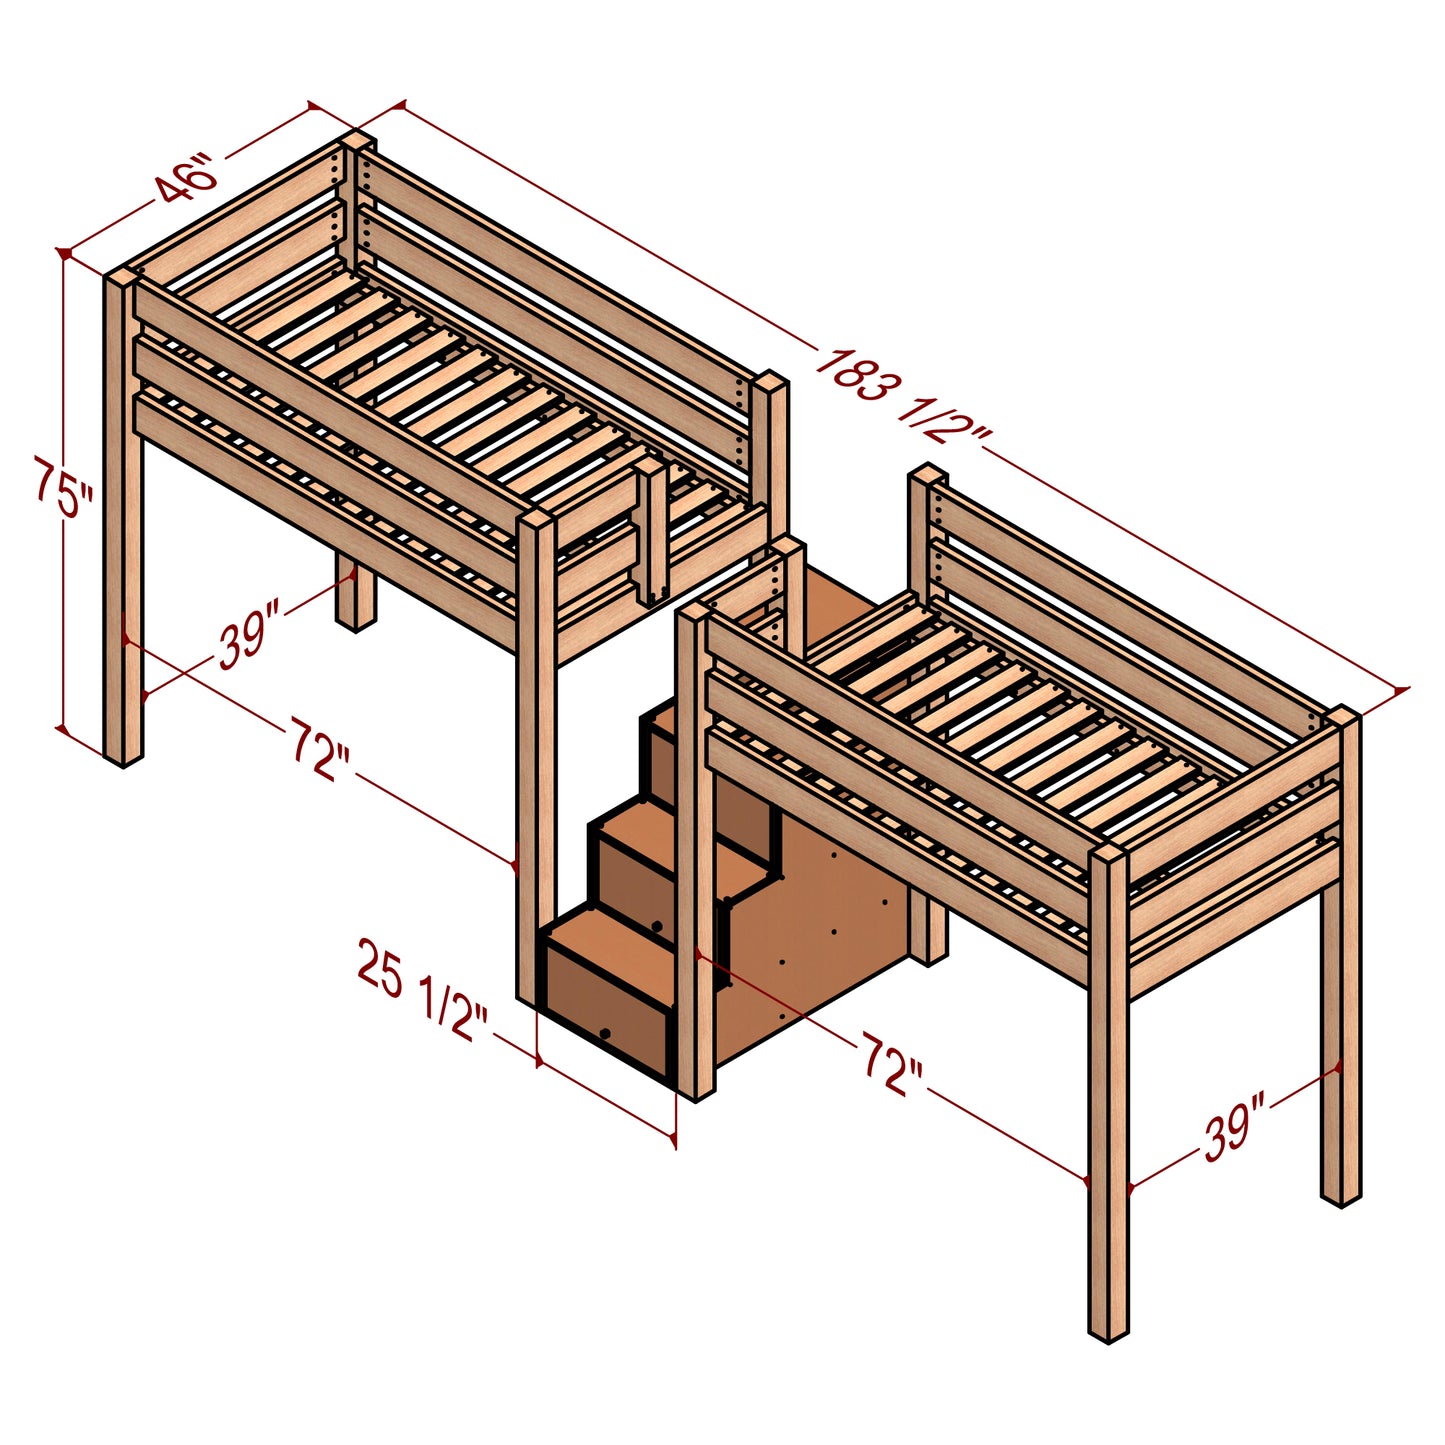 DIY Bunk Bed Plans | Two Beds with Staircase & Drawer Ladder